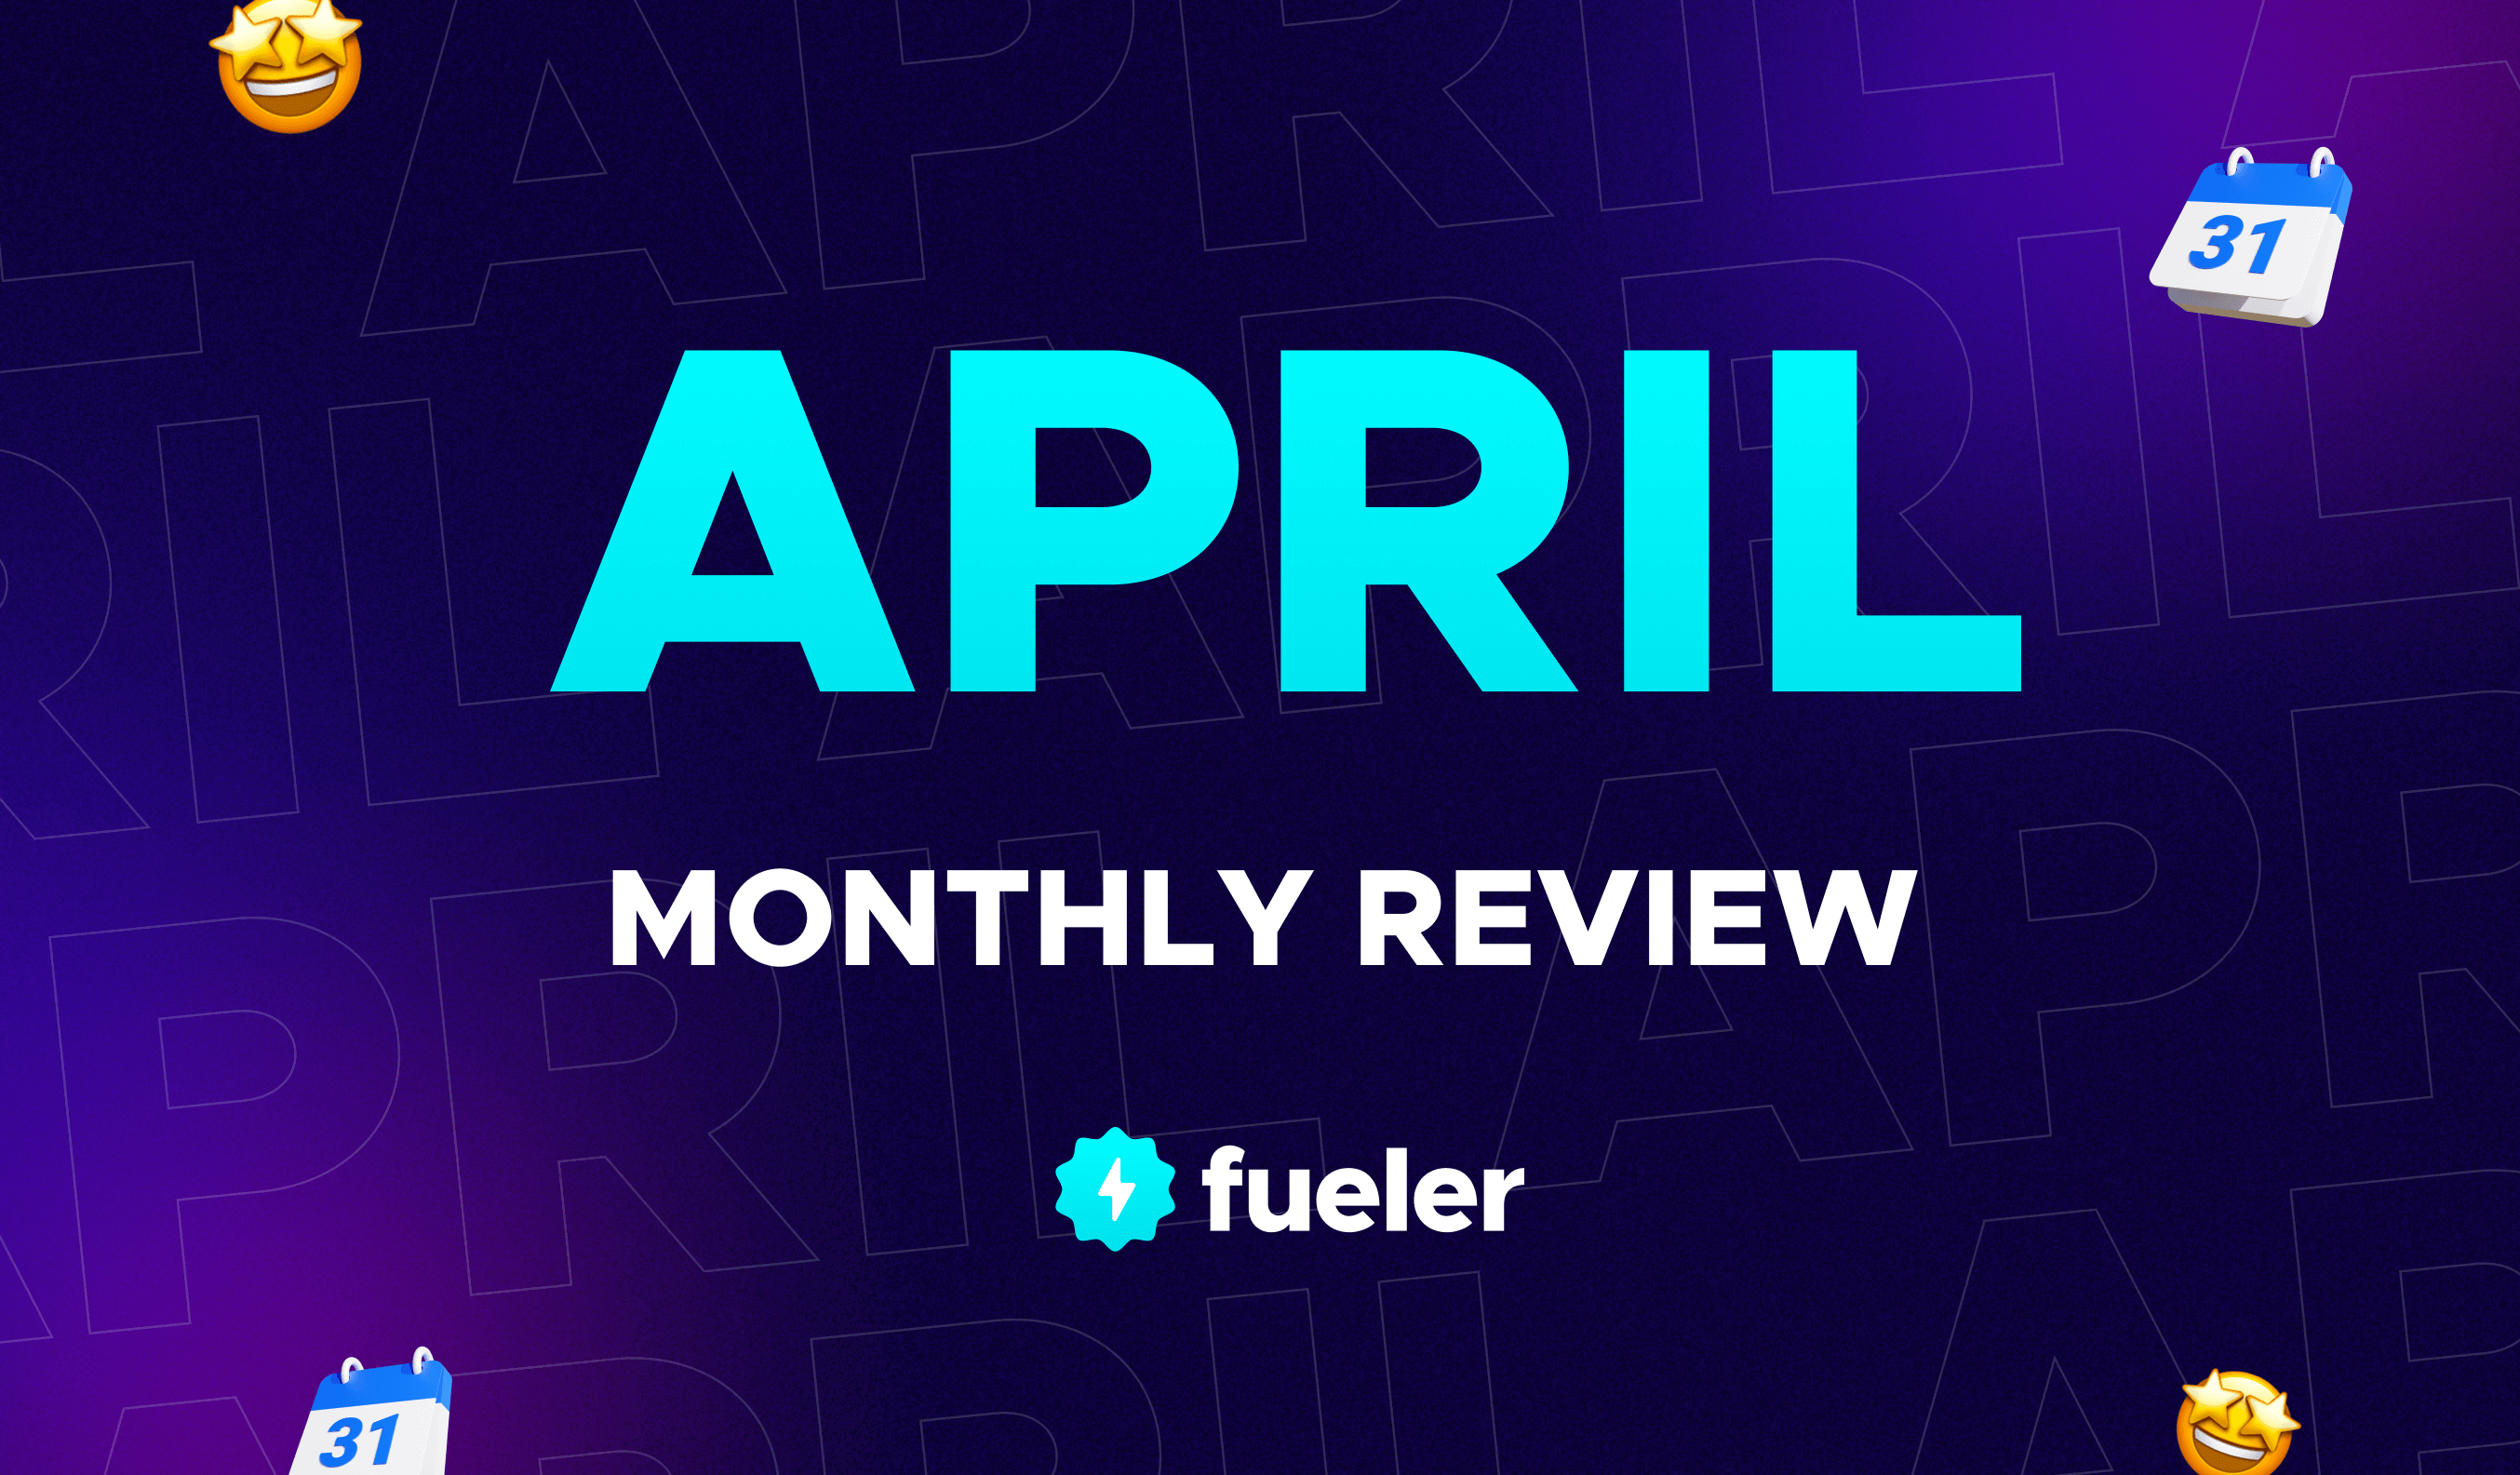 What's New in Fueler: April 2022